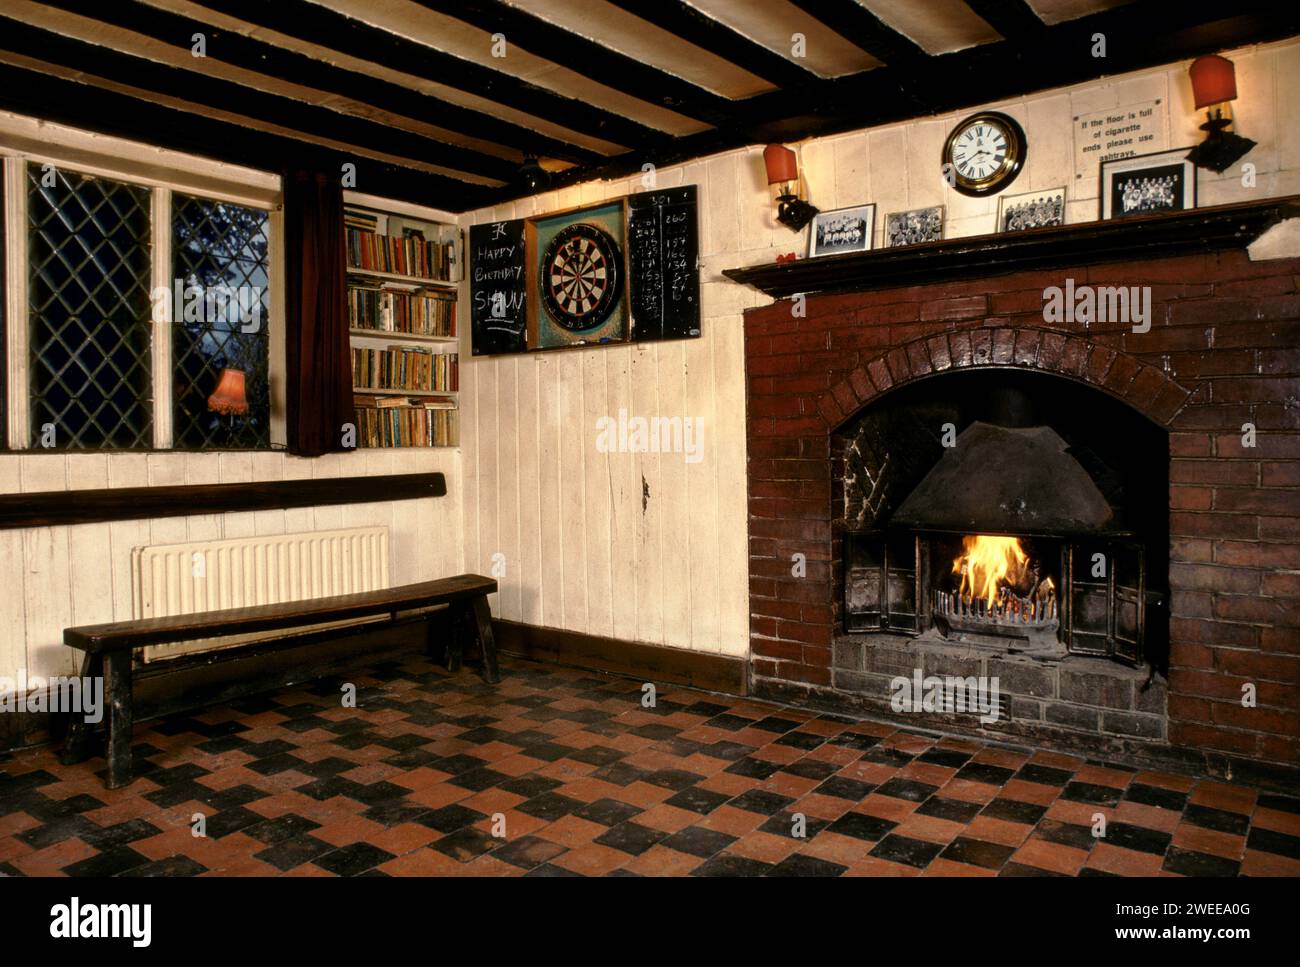 The Castle the village pub at Chiddingstone, Kent. Interior with dart board a real log wood fire. Tiled floor, wood bench. 1990s 1991 UK HOMER SYKES Stock Photo